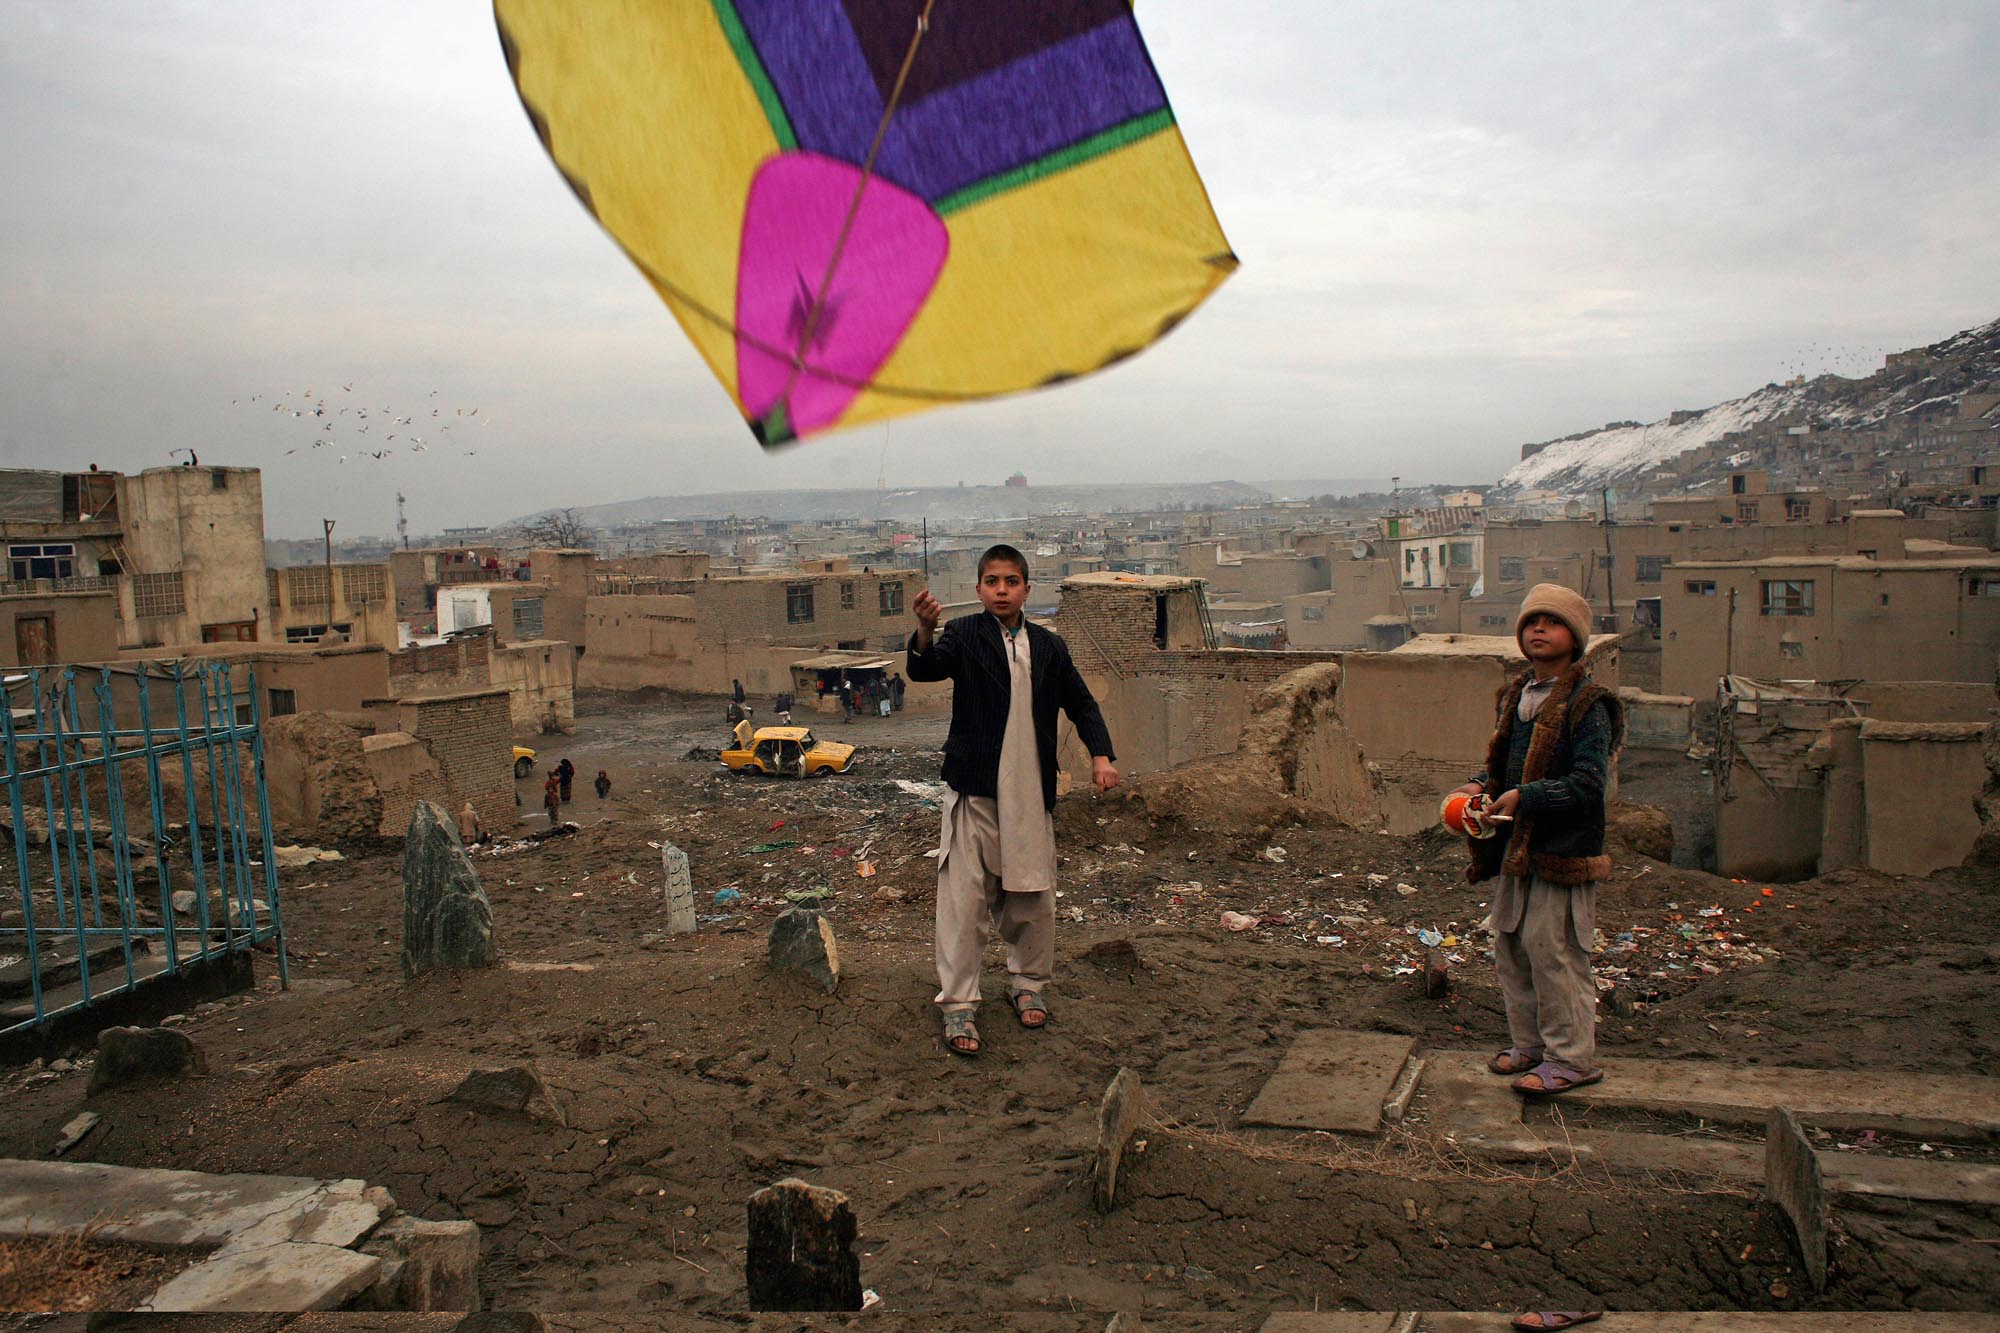 2015 Moving Mountains Symposium Theme: Afghanistan